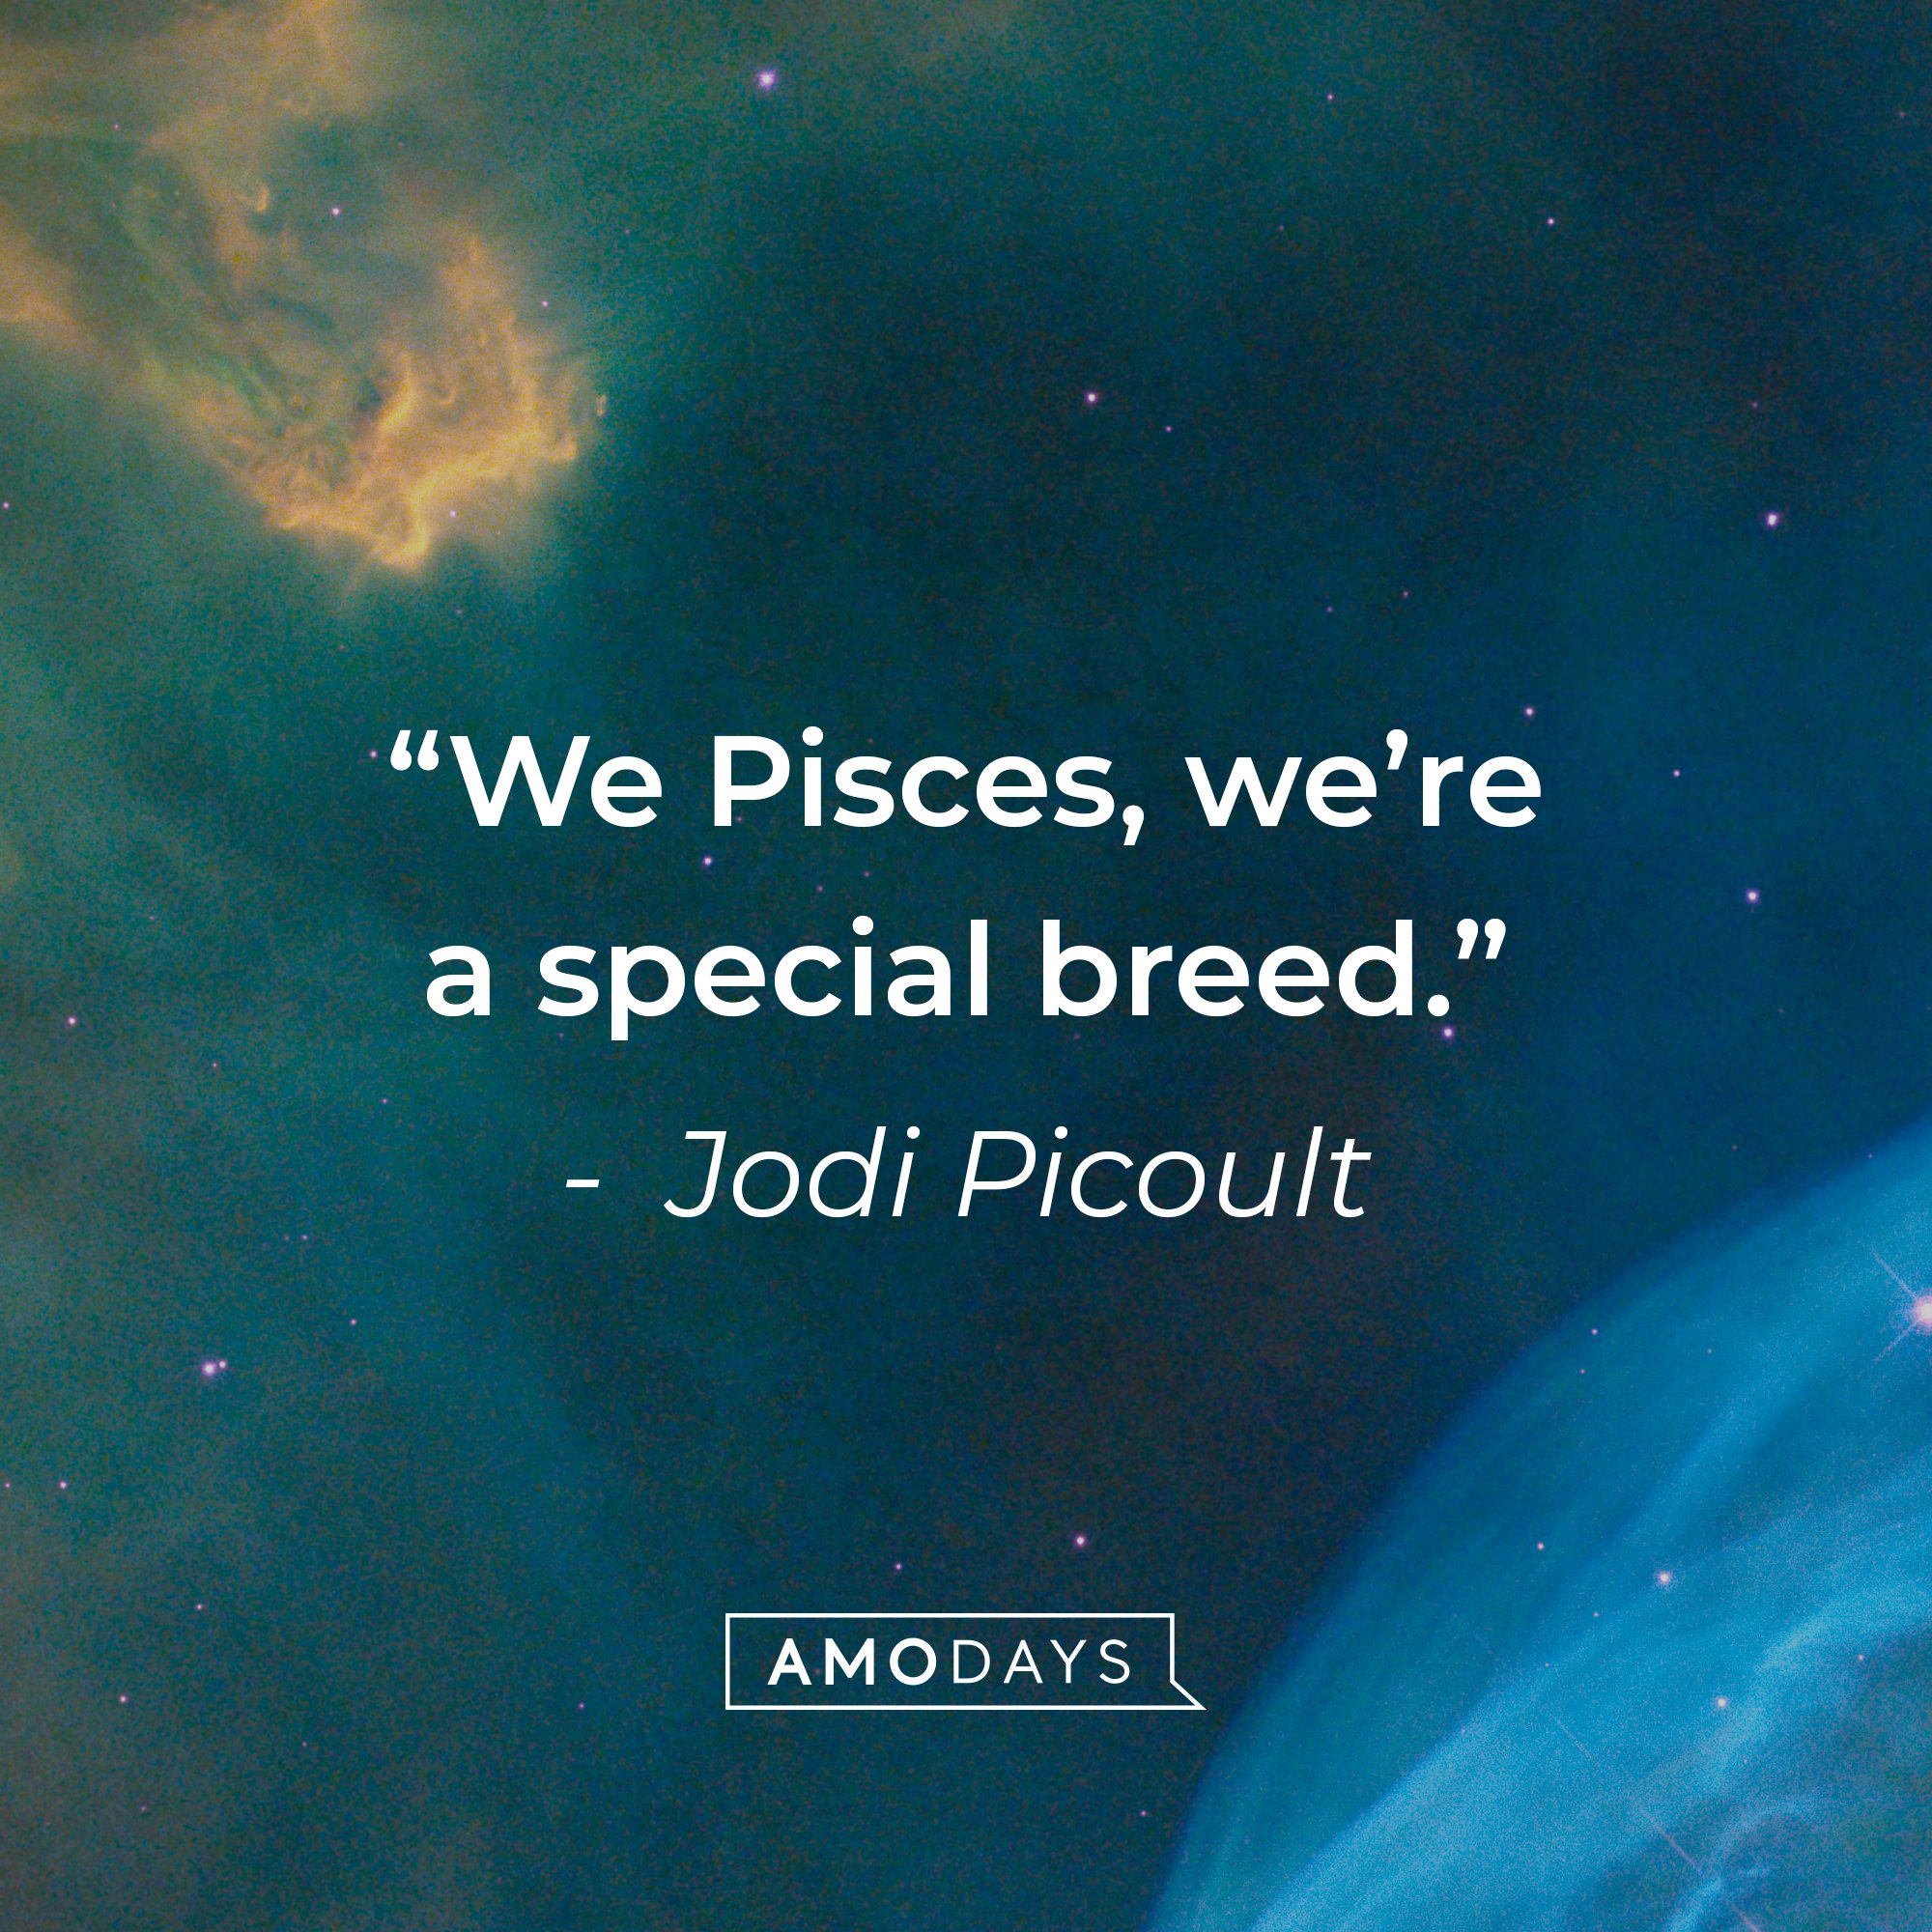 Jodi Picoult's quote: "We Pisces, we're a special breed." | Image: AmoDays